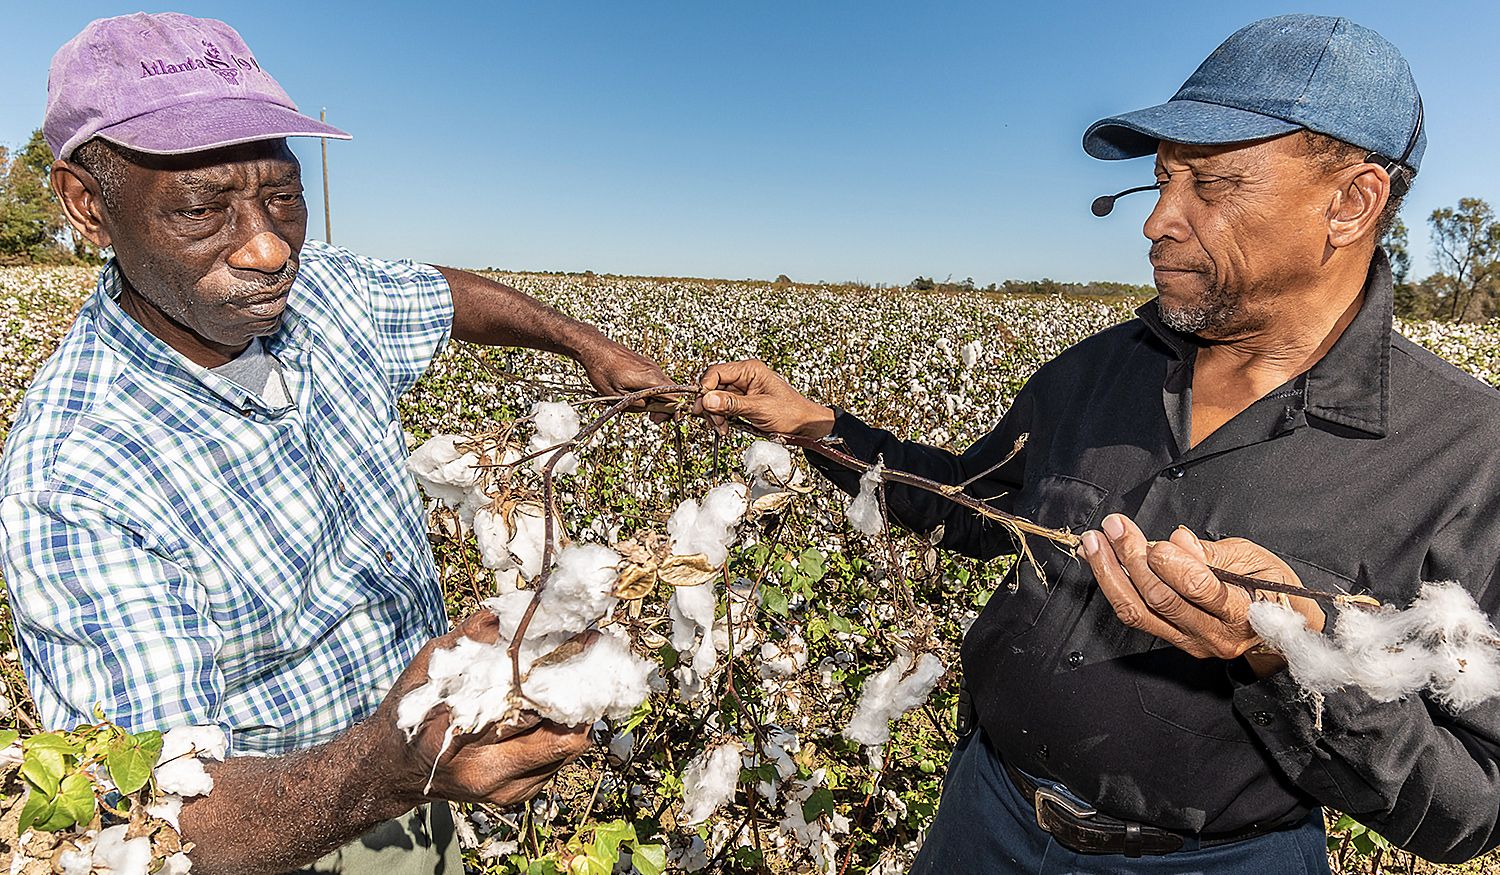 Ricky Waters (left) FVSU Extension program assistant for Macon County, inspects cotton crop damage with Willie Joe Daniels on his 25 acre farm near Oglethorpe.